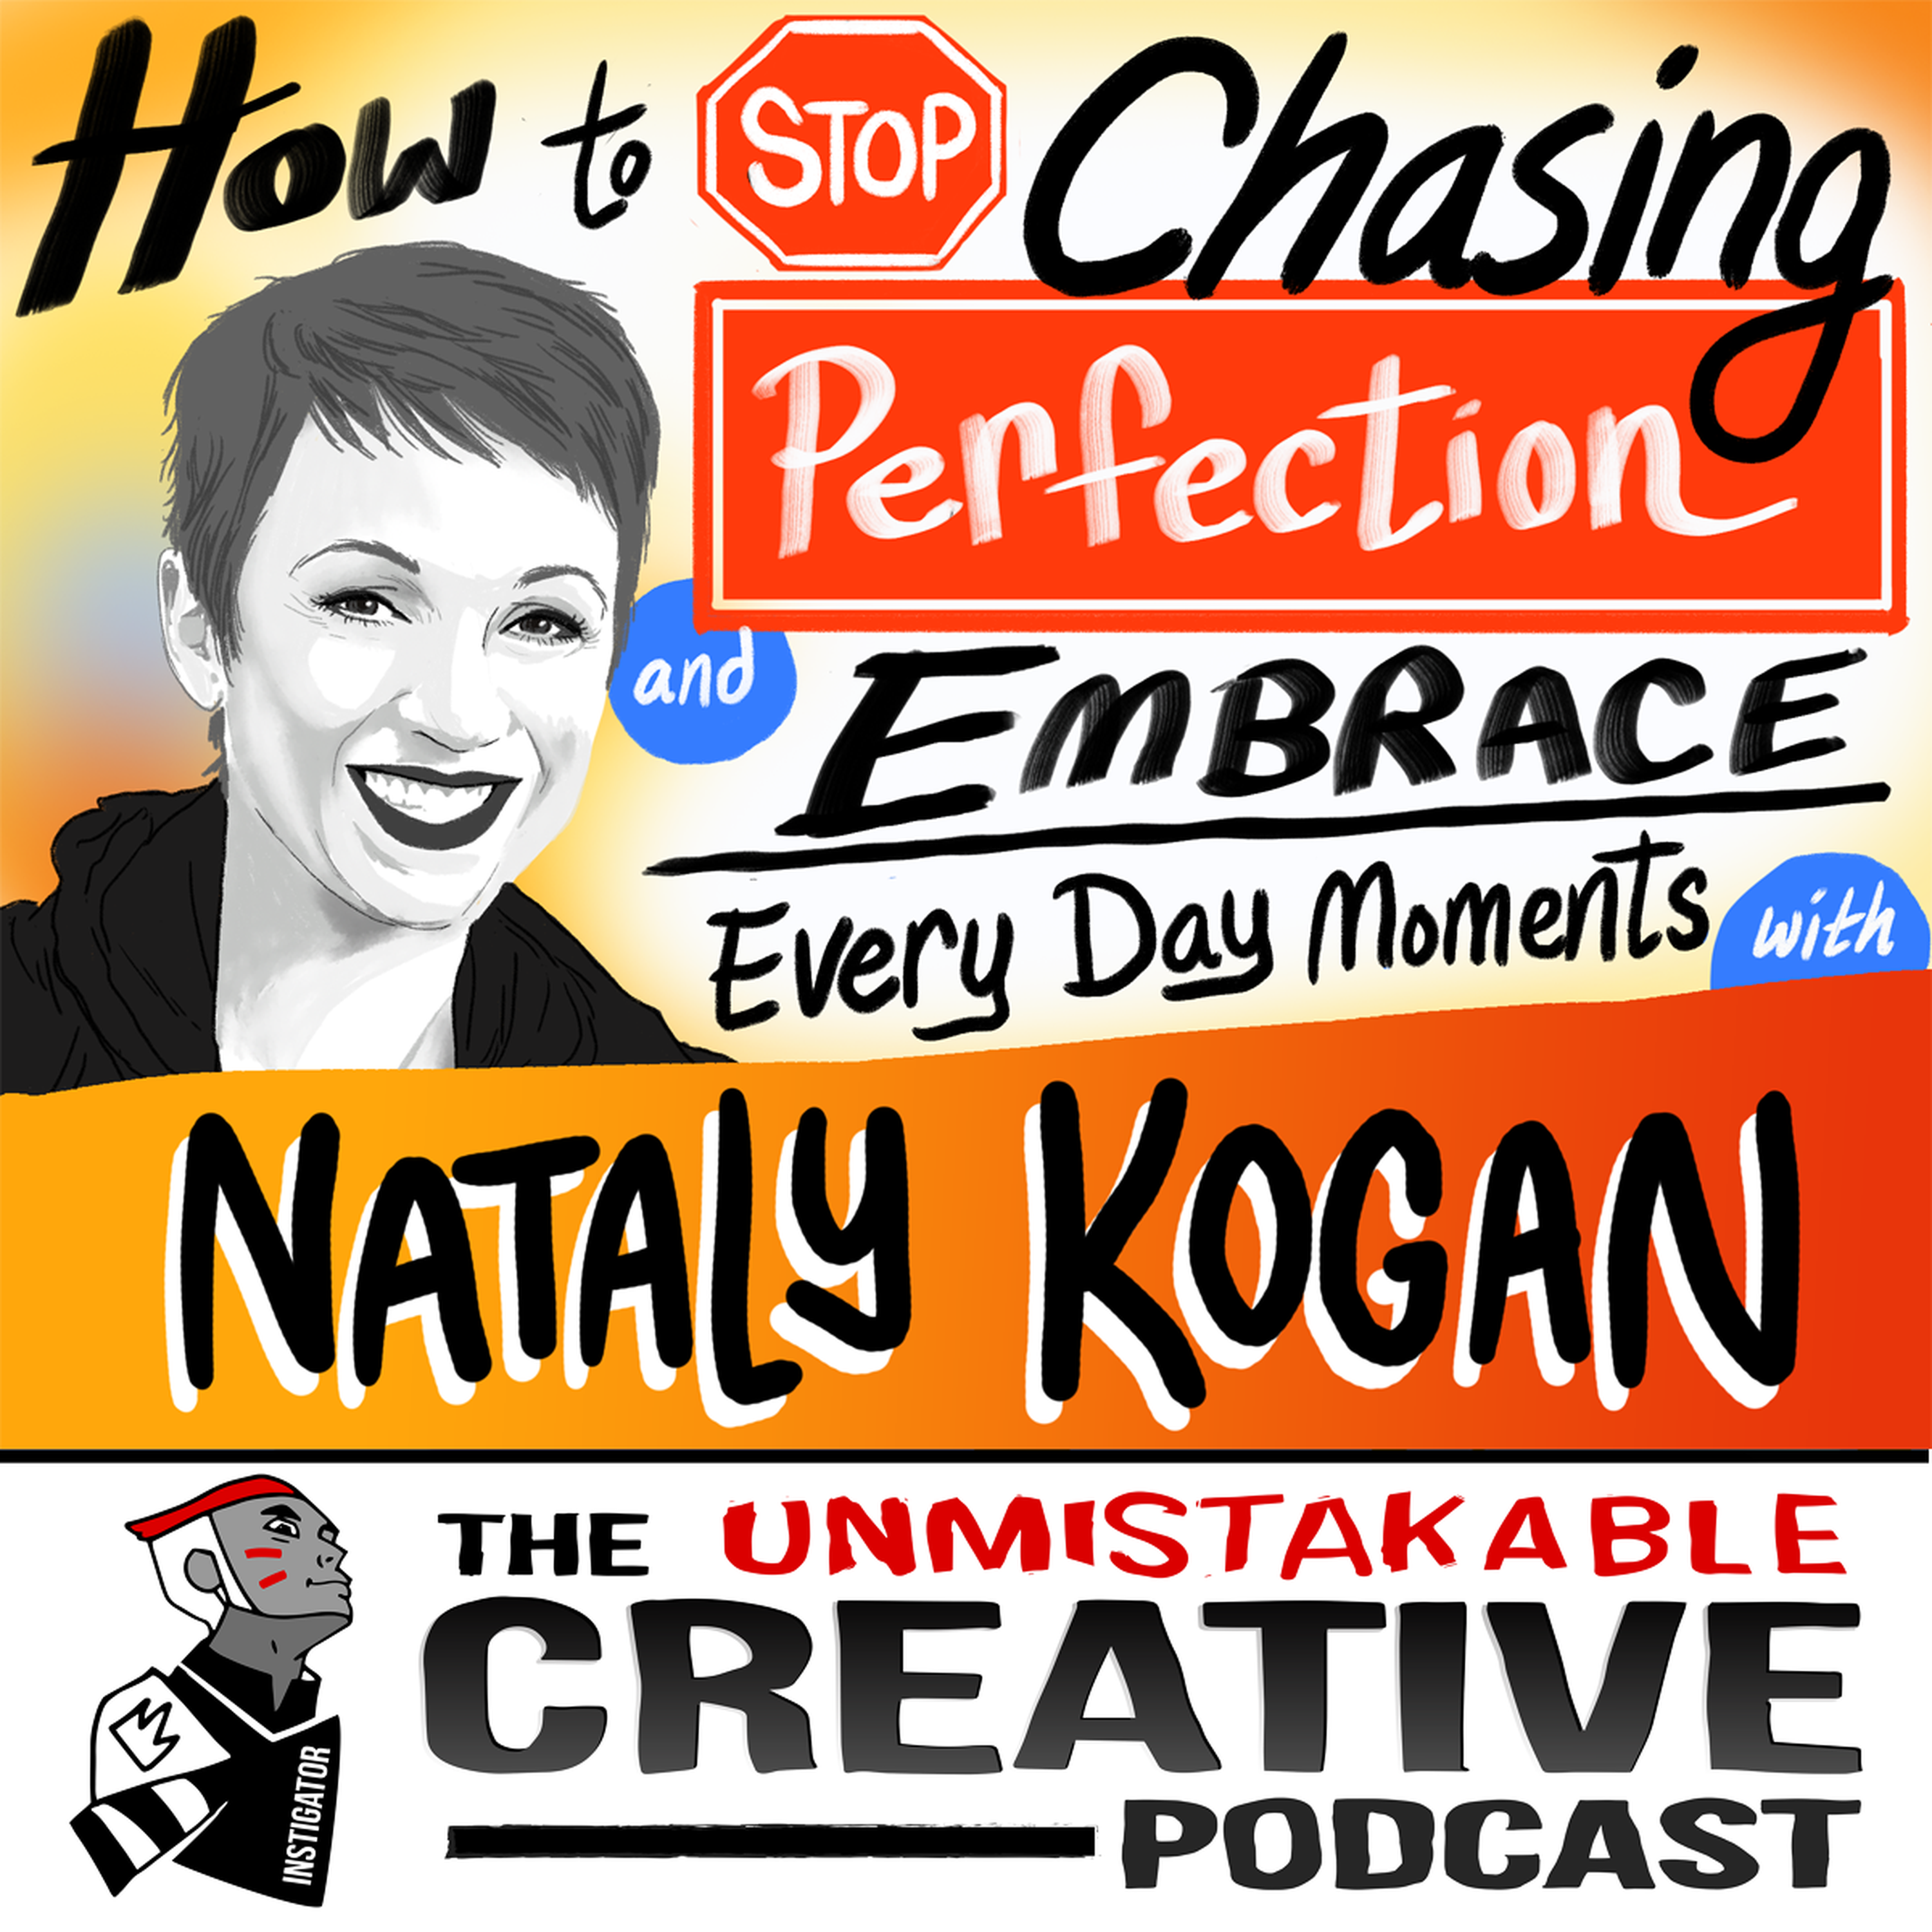 Nataly Kogan: How to Stop Chasing Perfection and Embrace Every Day Moments